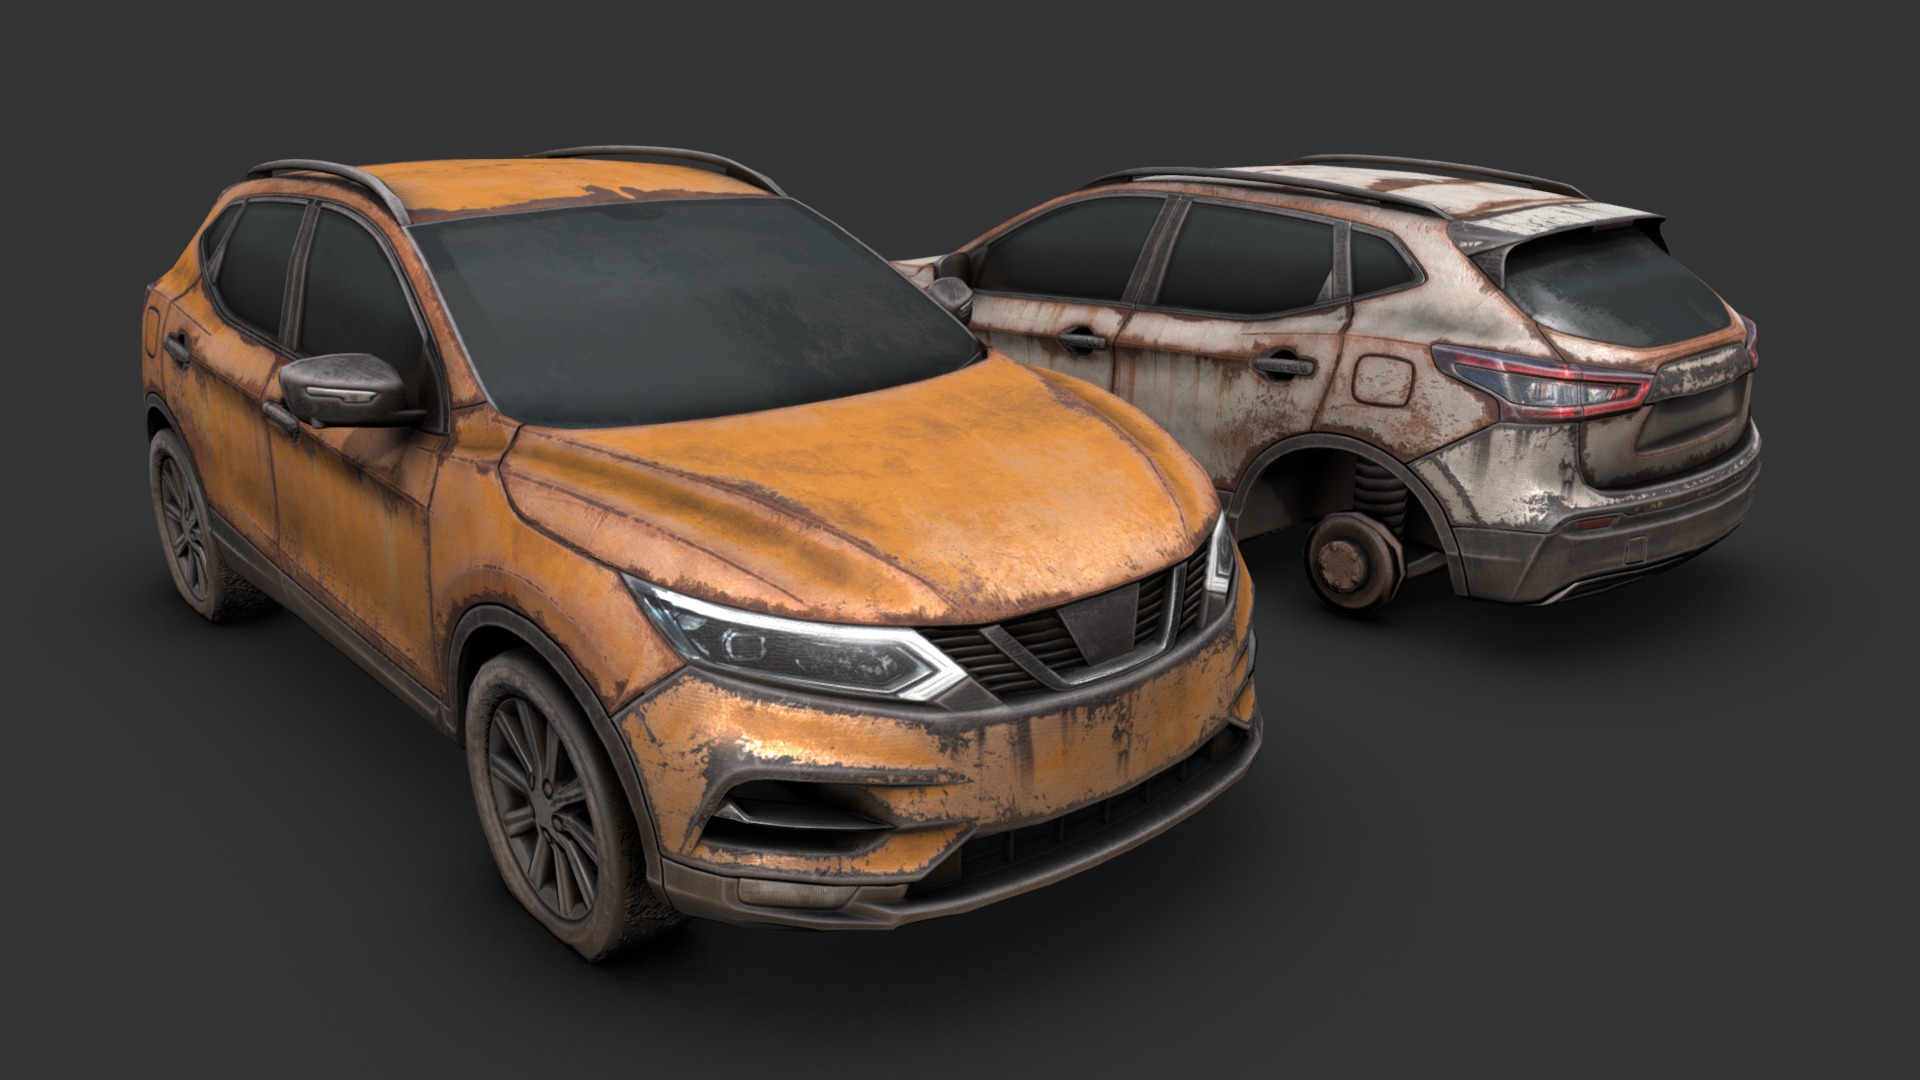 3D model Derelict Modern SUV - This is a 3D model of the Derelict Modern SUV. The 3D model is about a couple of cars parked next to each other.